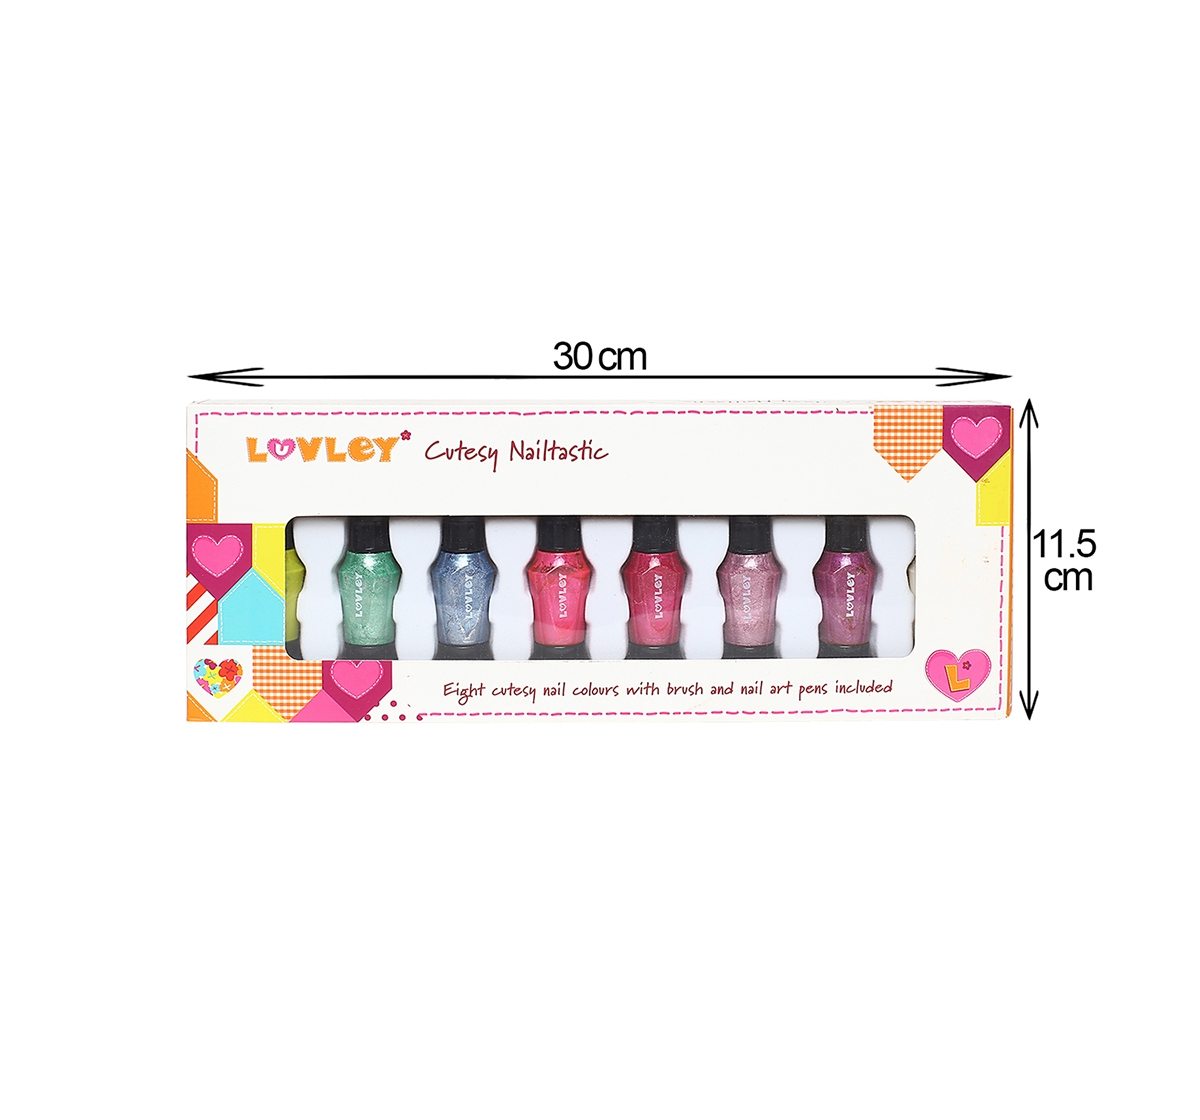 Luvley | Luvley Cutesy Nailtastic Toileteries and Makeup for Girls age 6Y+ 2